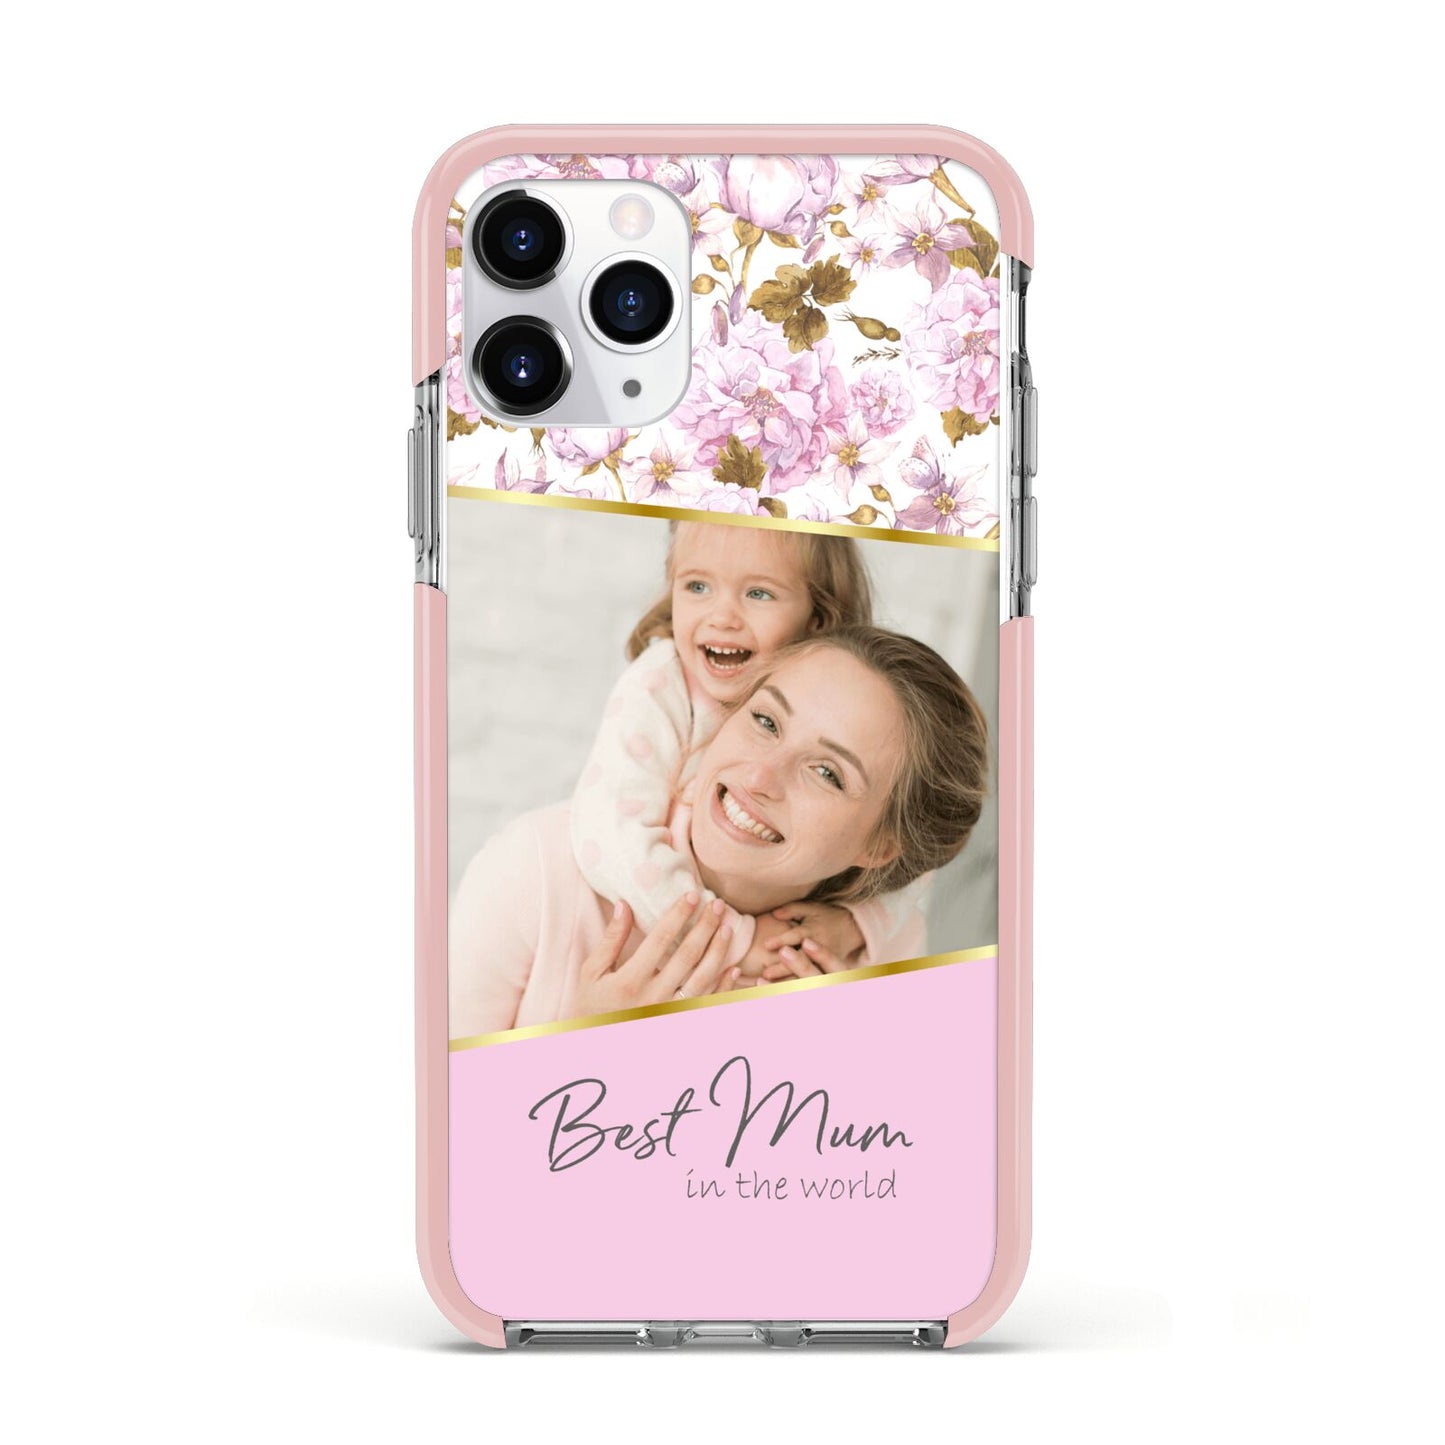 Personalised Love You Mum Apple iPhone 11 Pro in Silver with Pink Impact Case